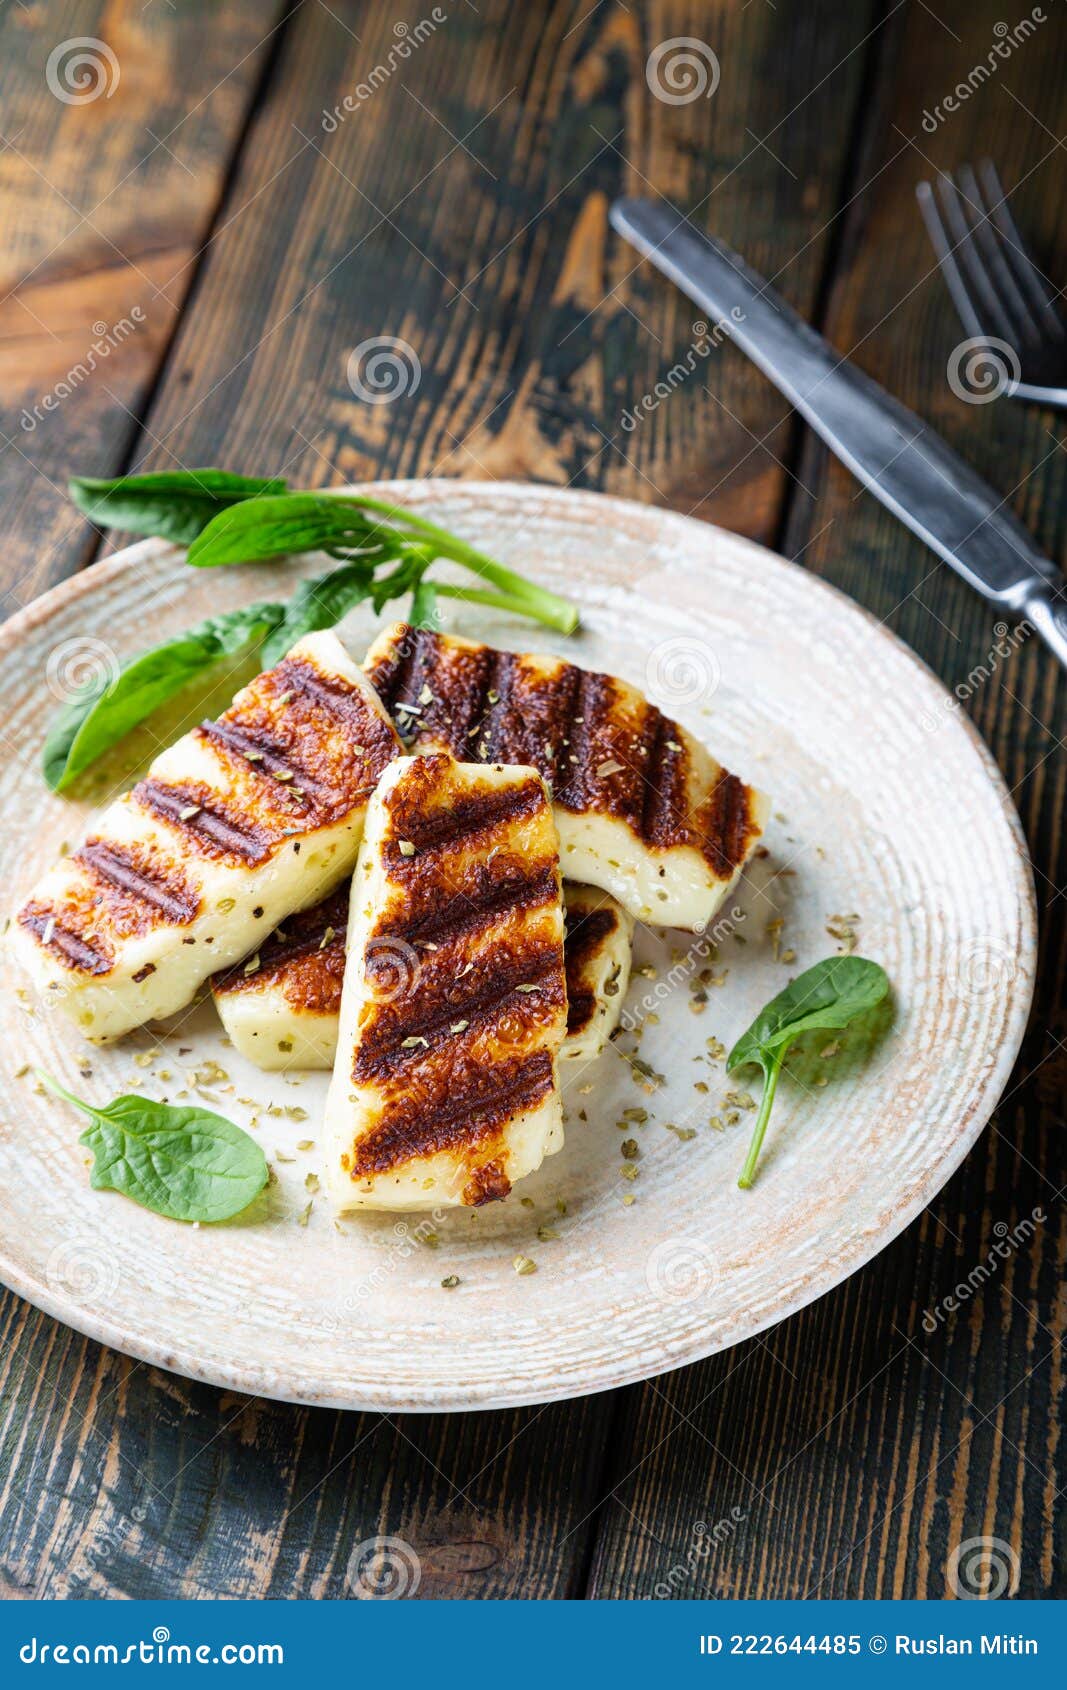 grilled halloumi cheese with herbs